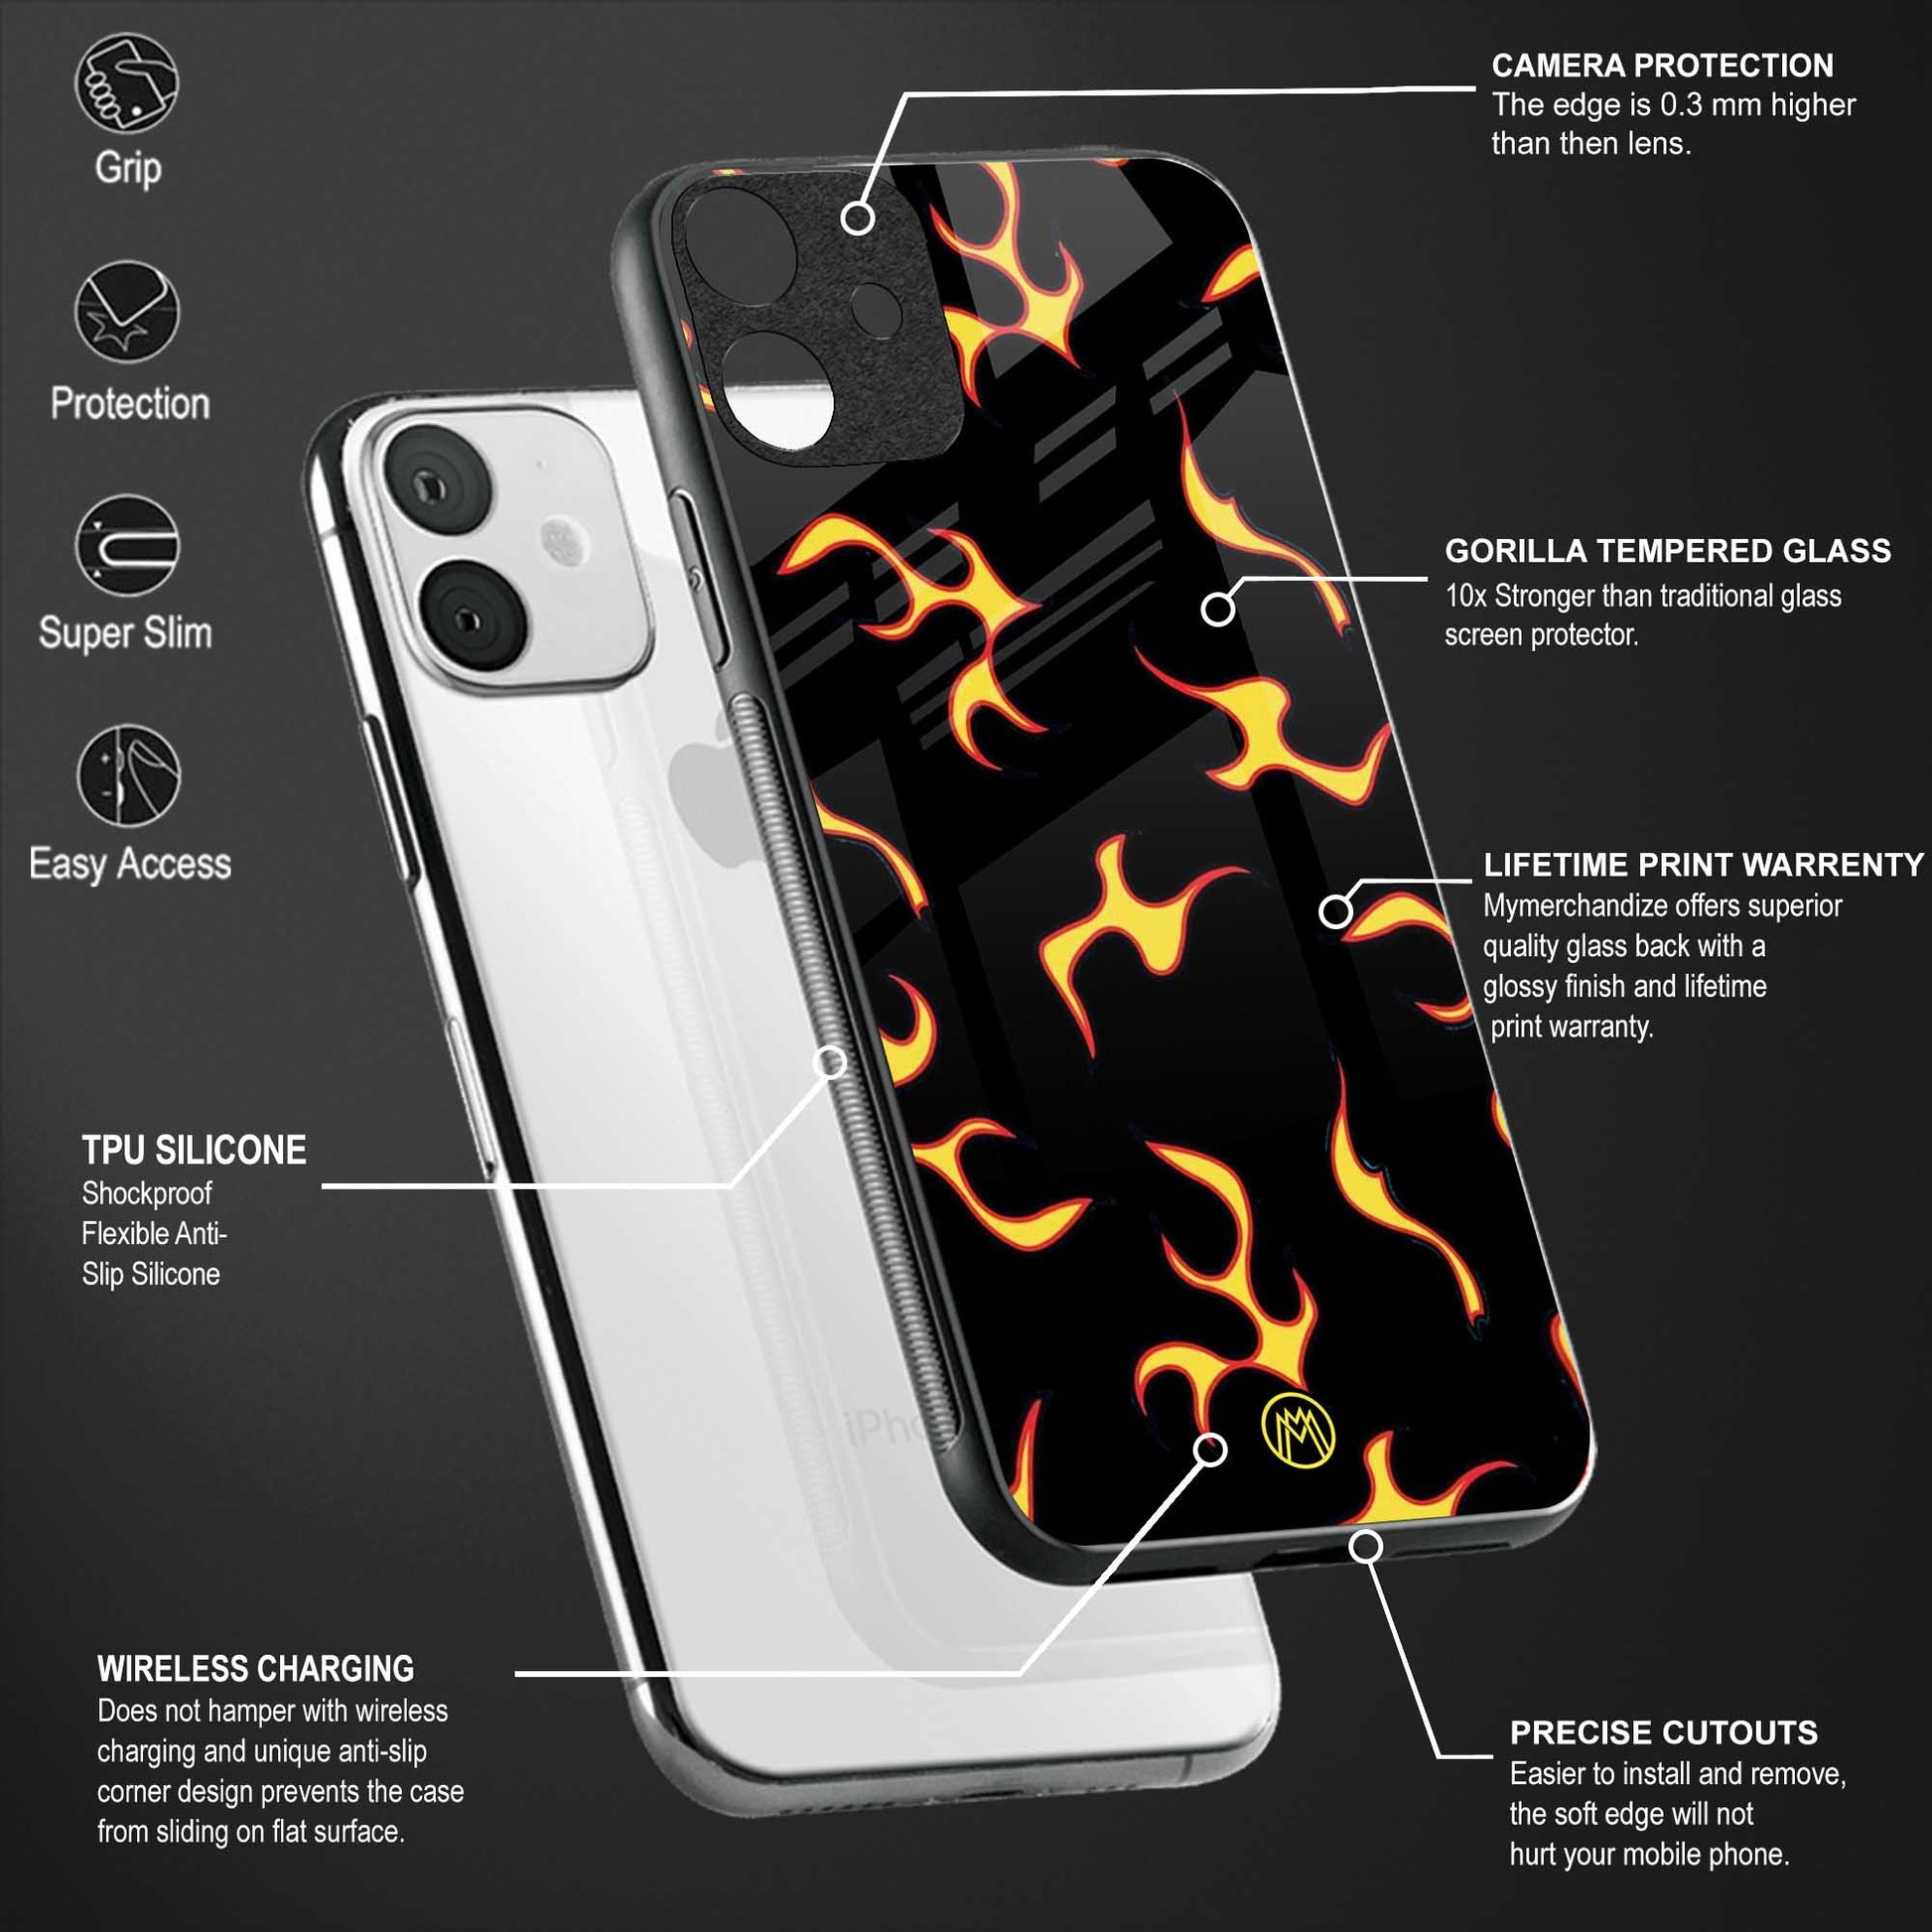 lil flames on black back phone cover | glass case for samsun galaxy a24 4g